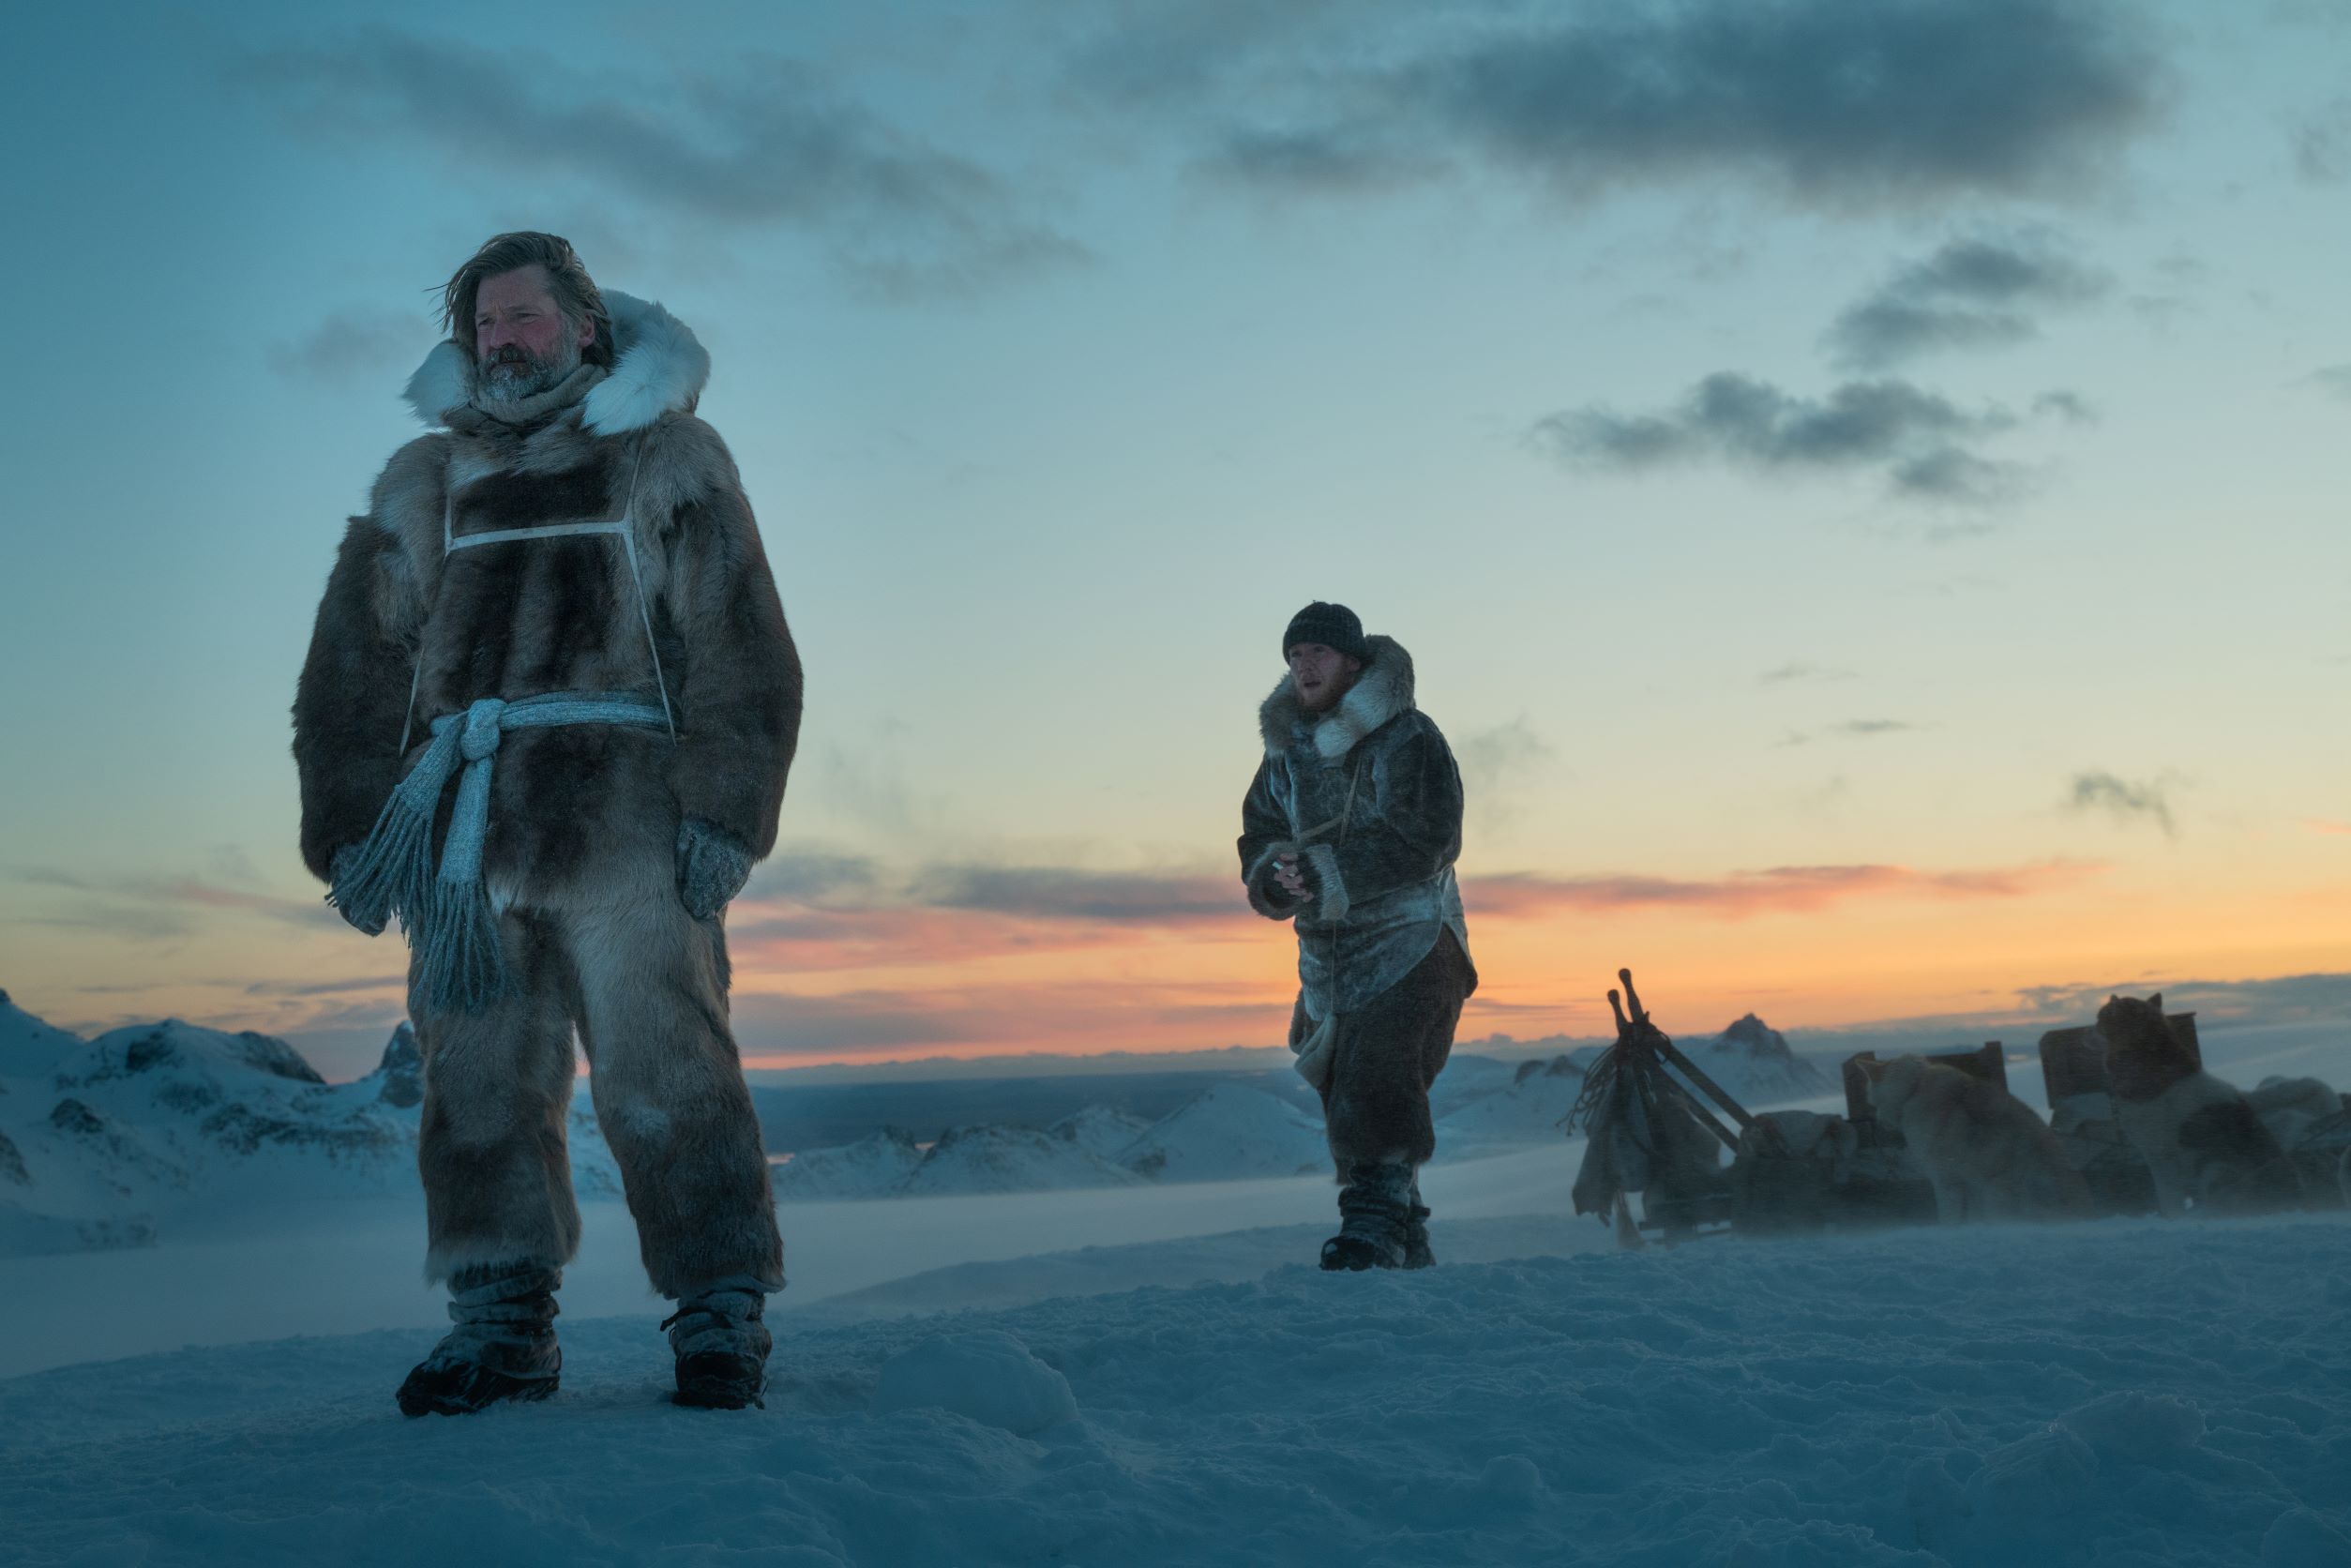 Image from 'Against the Ice' movie: actors Nikolaj Coster-Waldau and Joe Cole in a scene in the mountains and snow of Greenland.